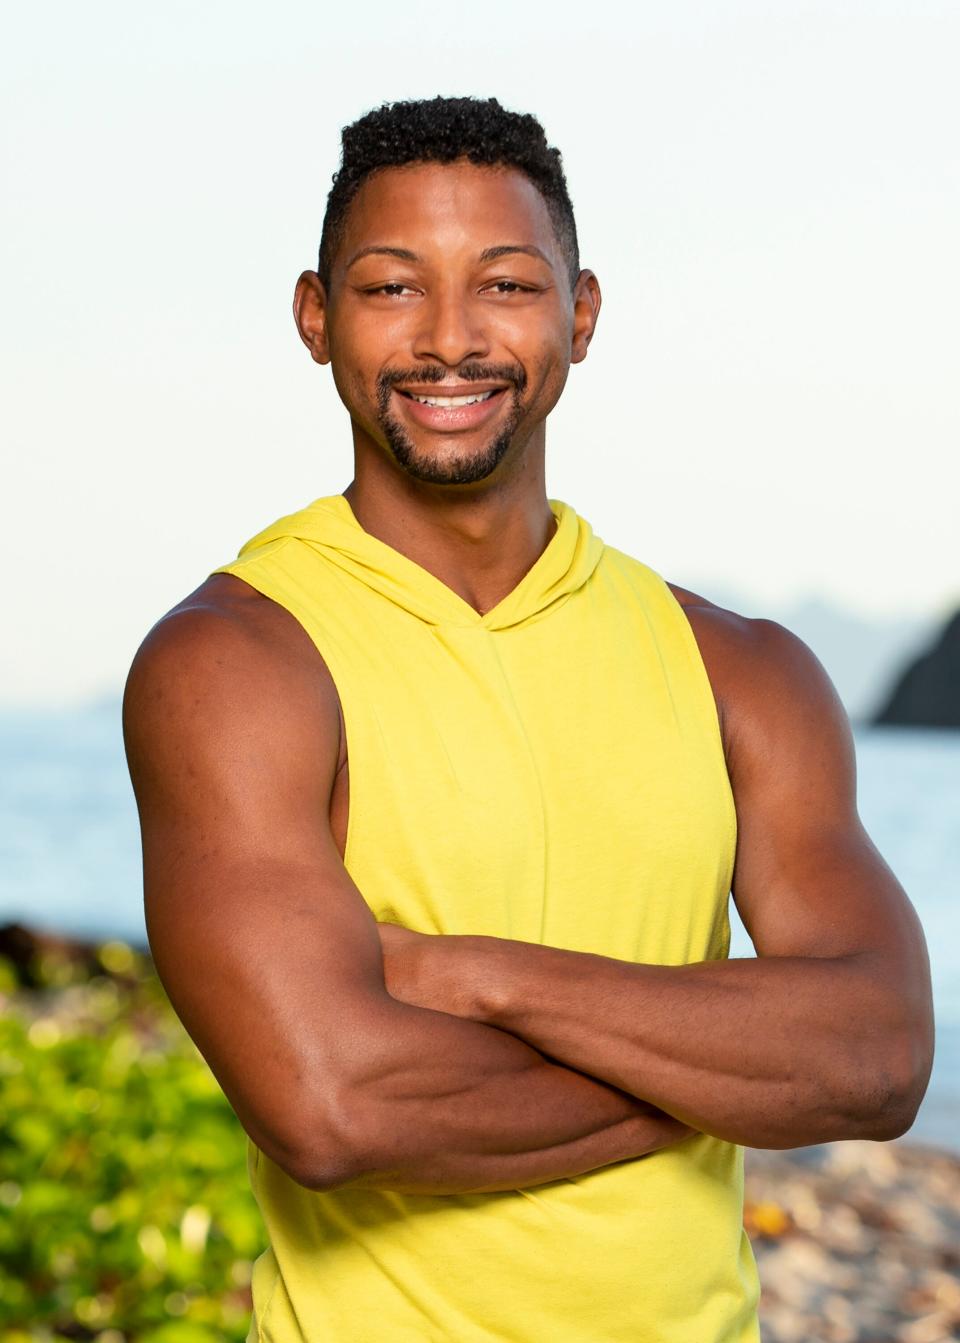 Josh Wilder, a 34-year-old surgical podiatrist, will be one of 18 contestants fighting through challenges and strategic votes to win the $1 million prize on "Survivor." Wilder's hometown is Cincinnati, according to his player bio, although he currently resides in Atlanta.